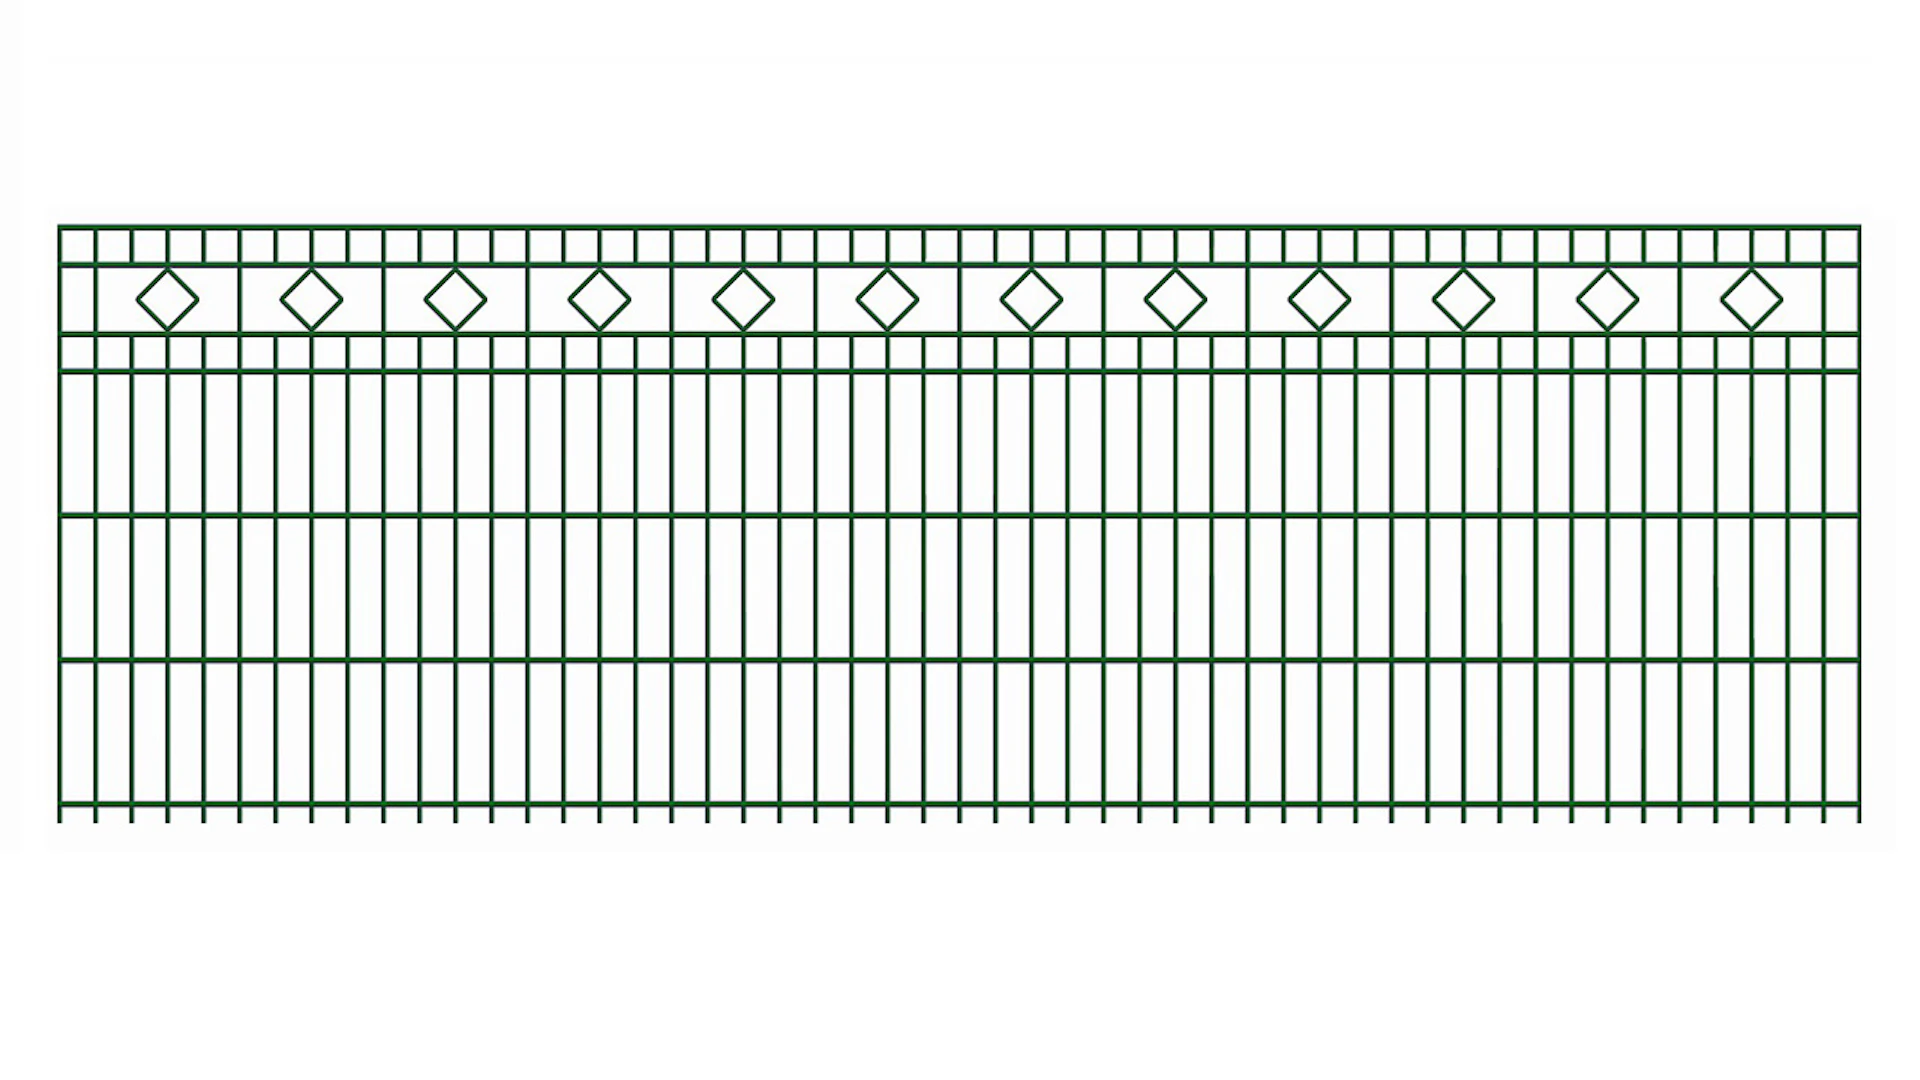 planeo double-rail decorative fence square 6/6/6 RAL 6005 moss green height 830 mm